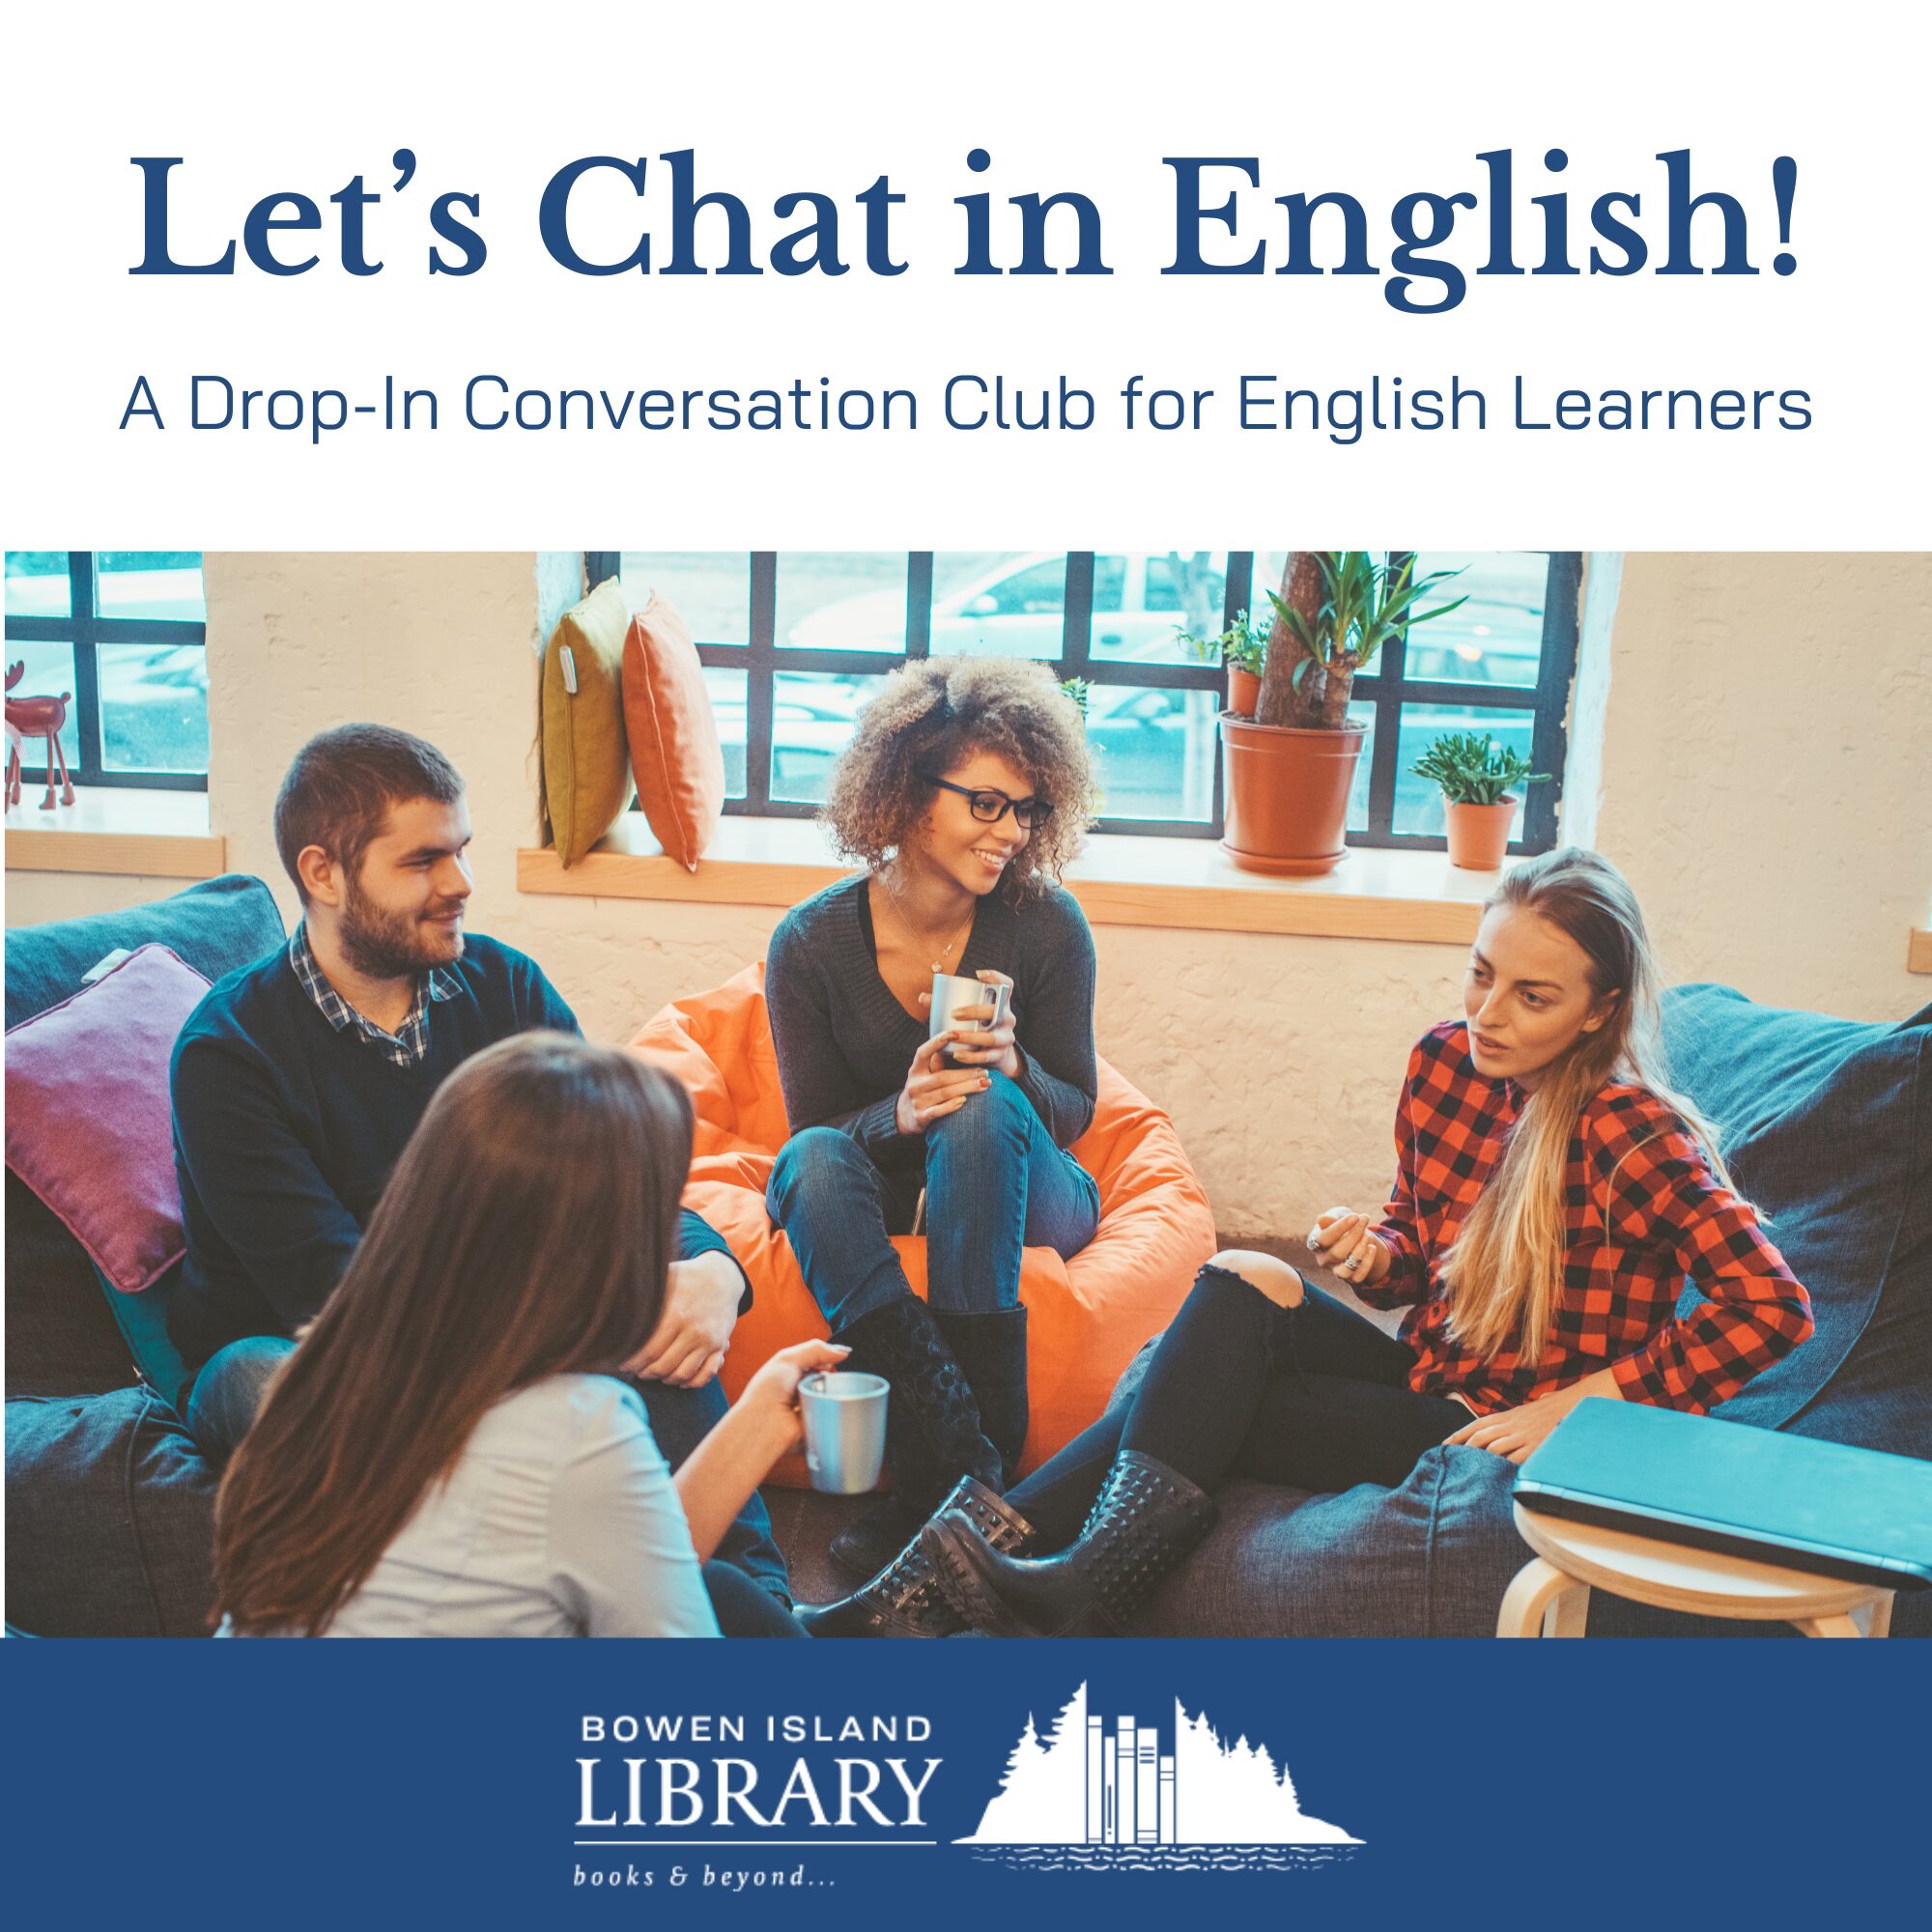 Let's Talk in English conversation club people chatting ina circle with mugs and smiling